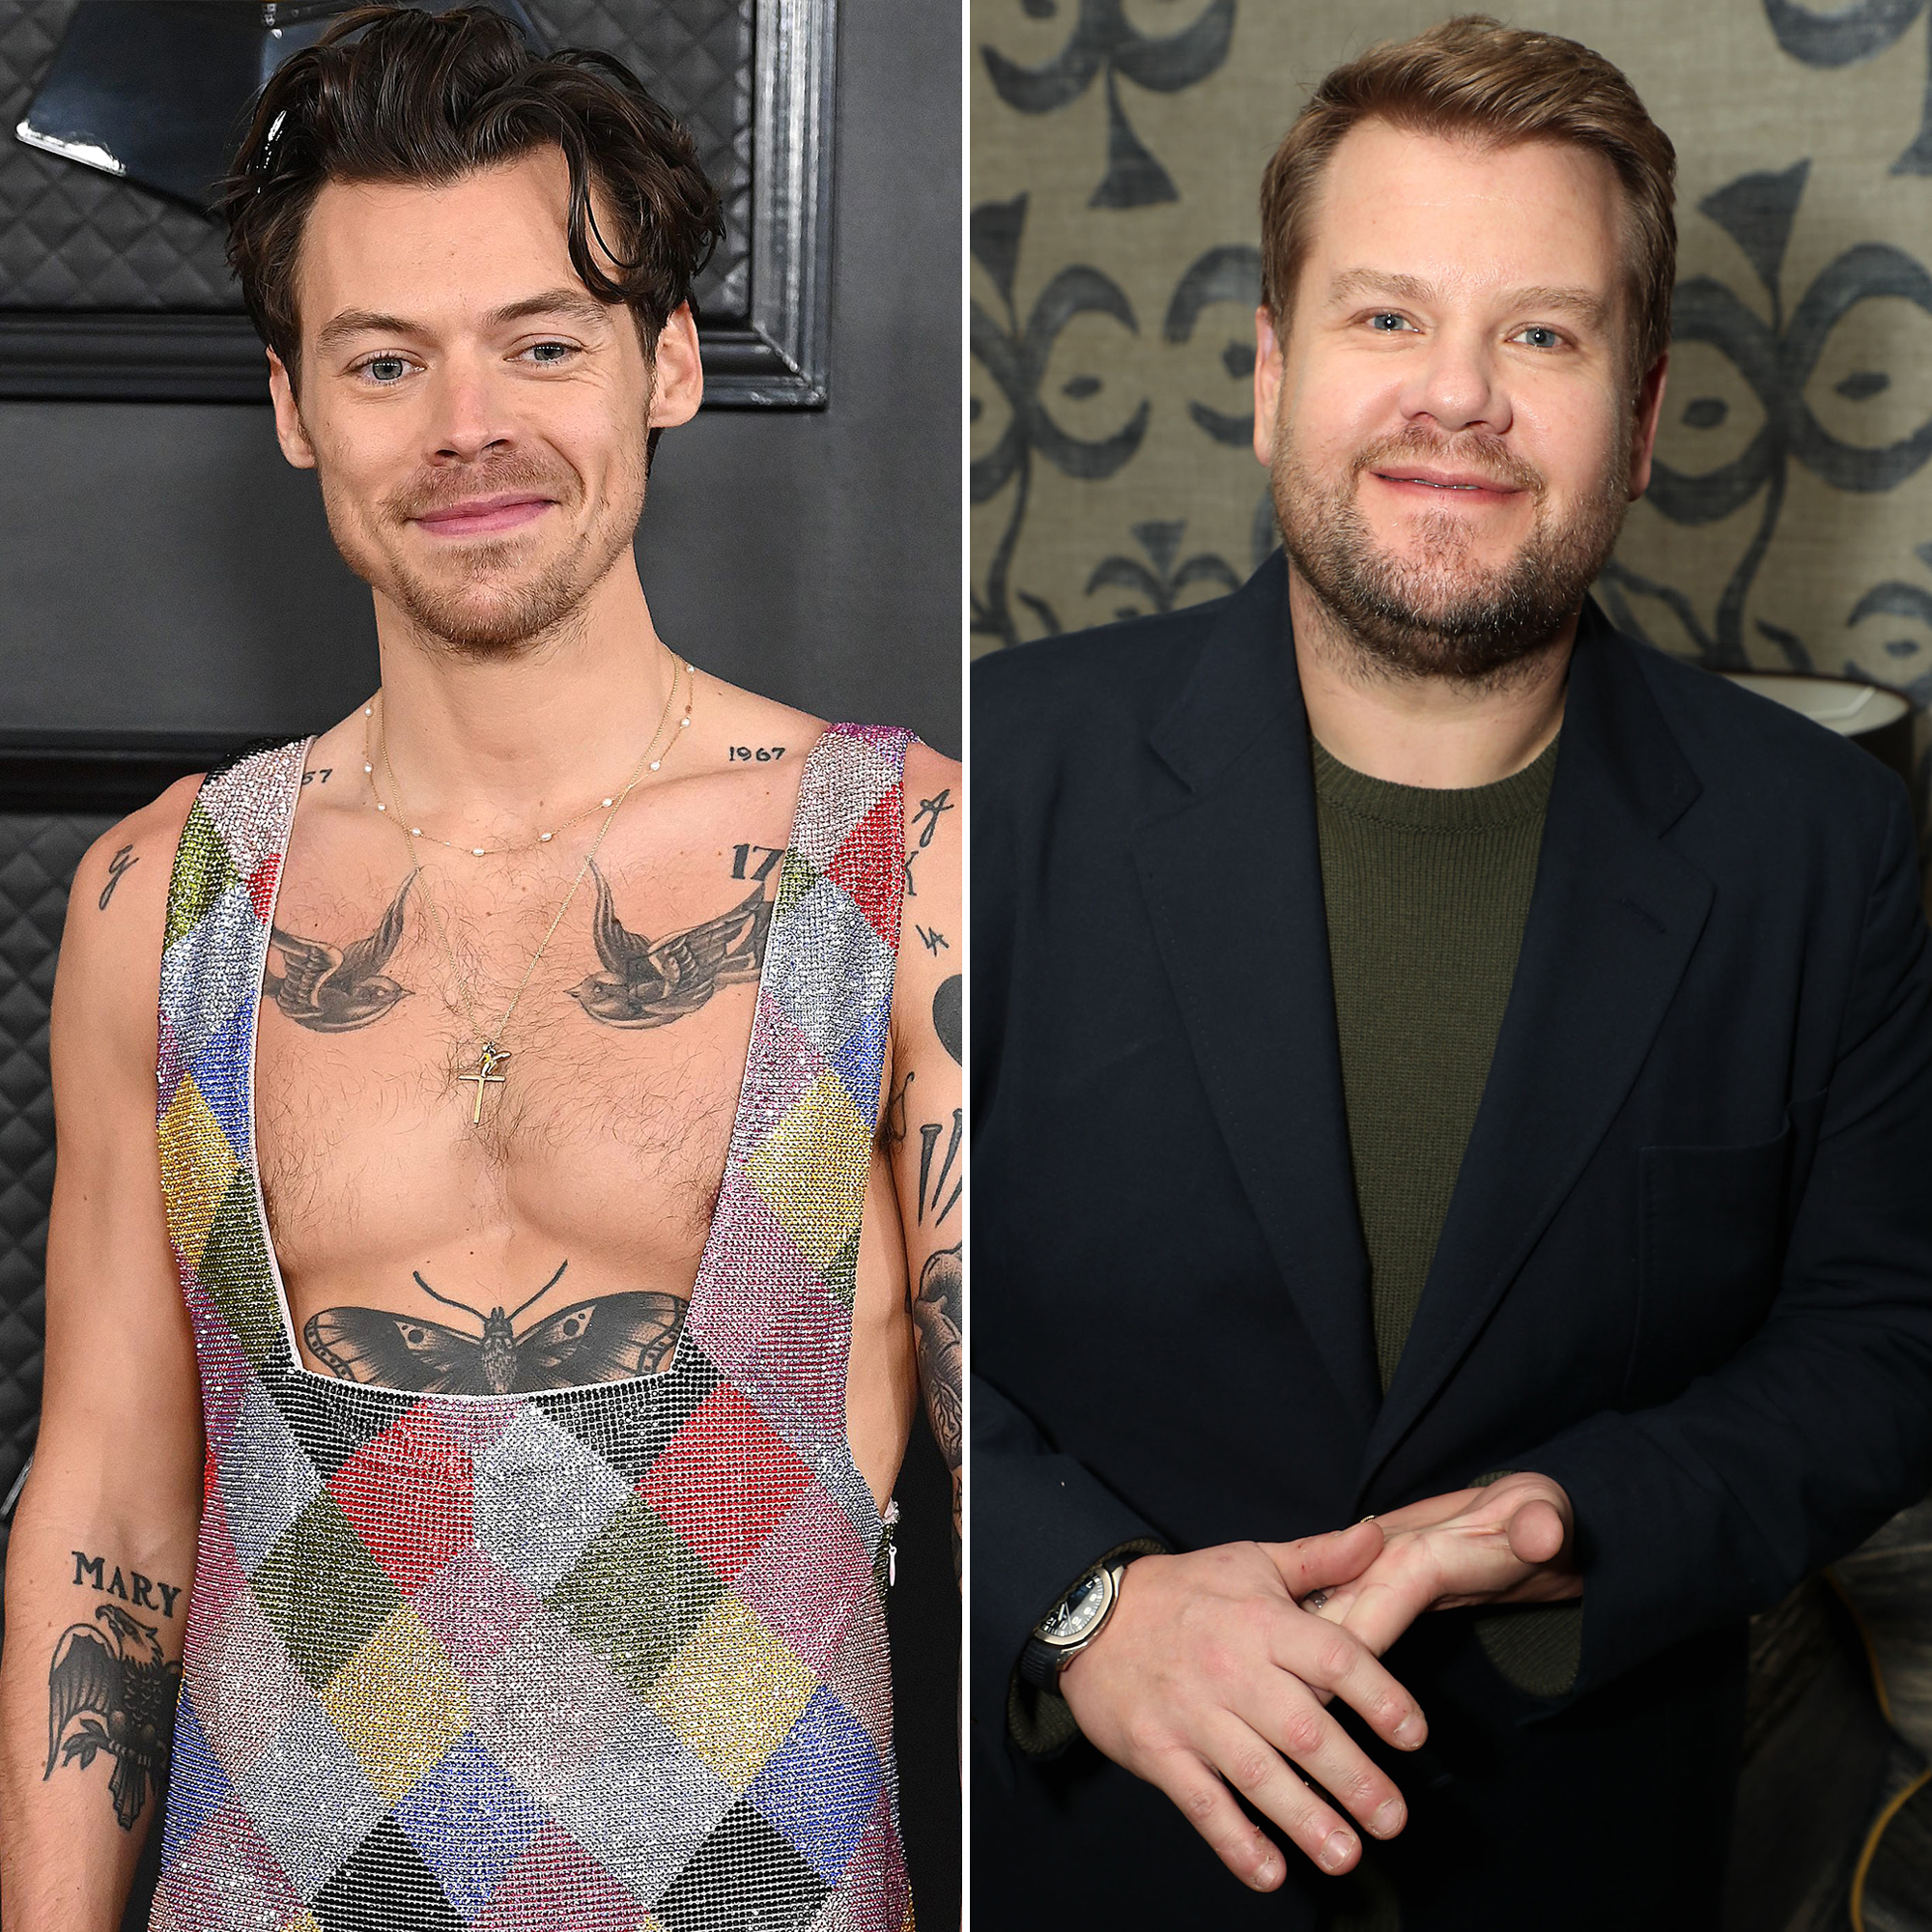 Niall Horan Tattoos His Butt With Comedian's Face!